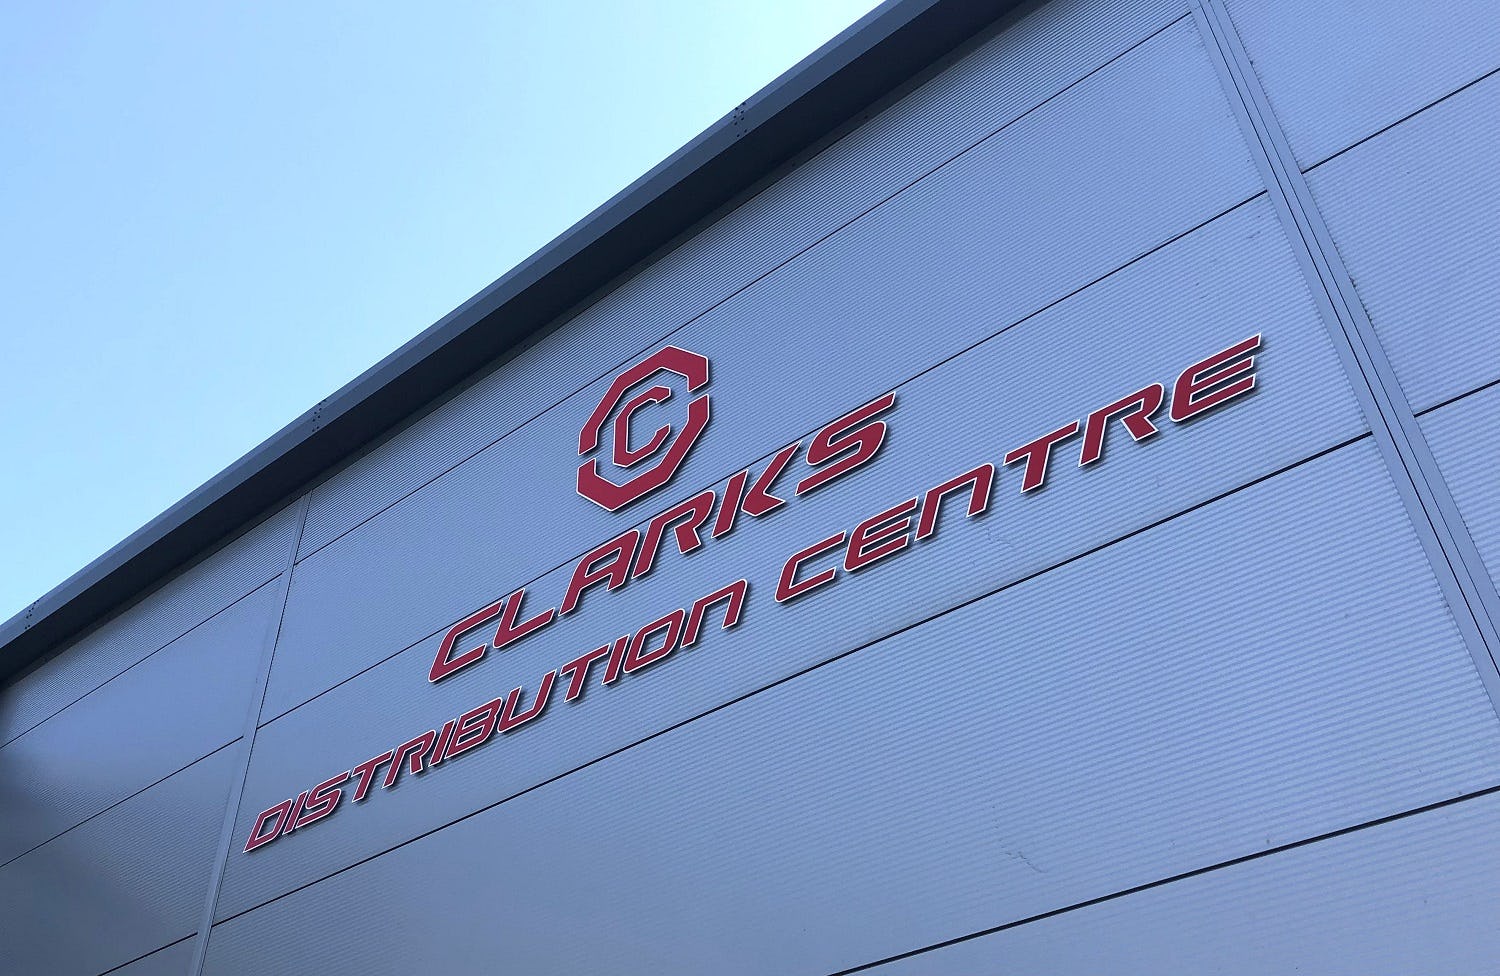 Read about Clarks Cycle Systems